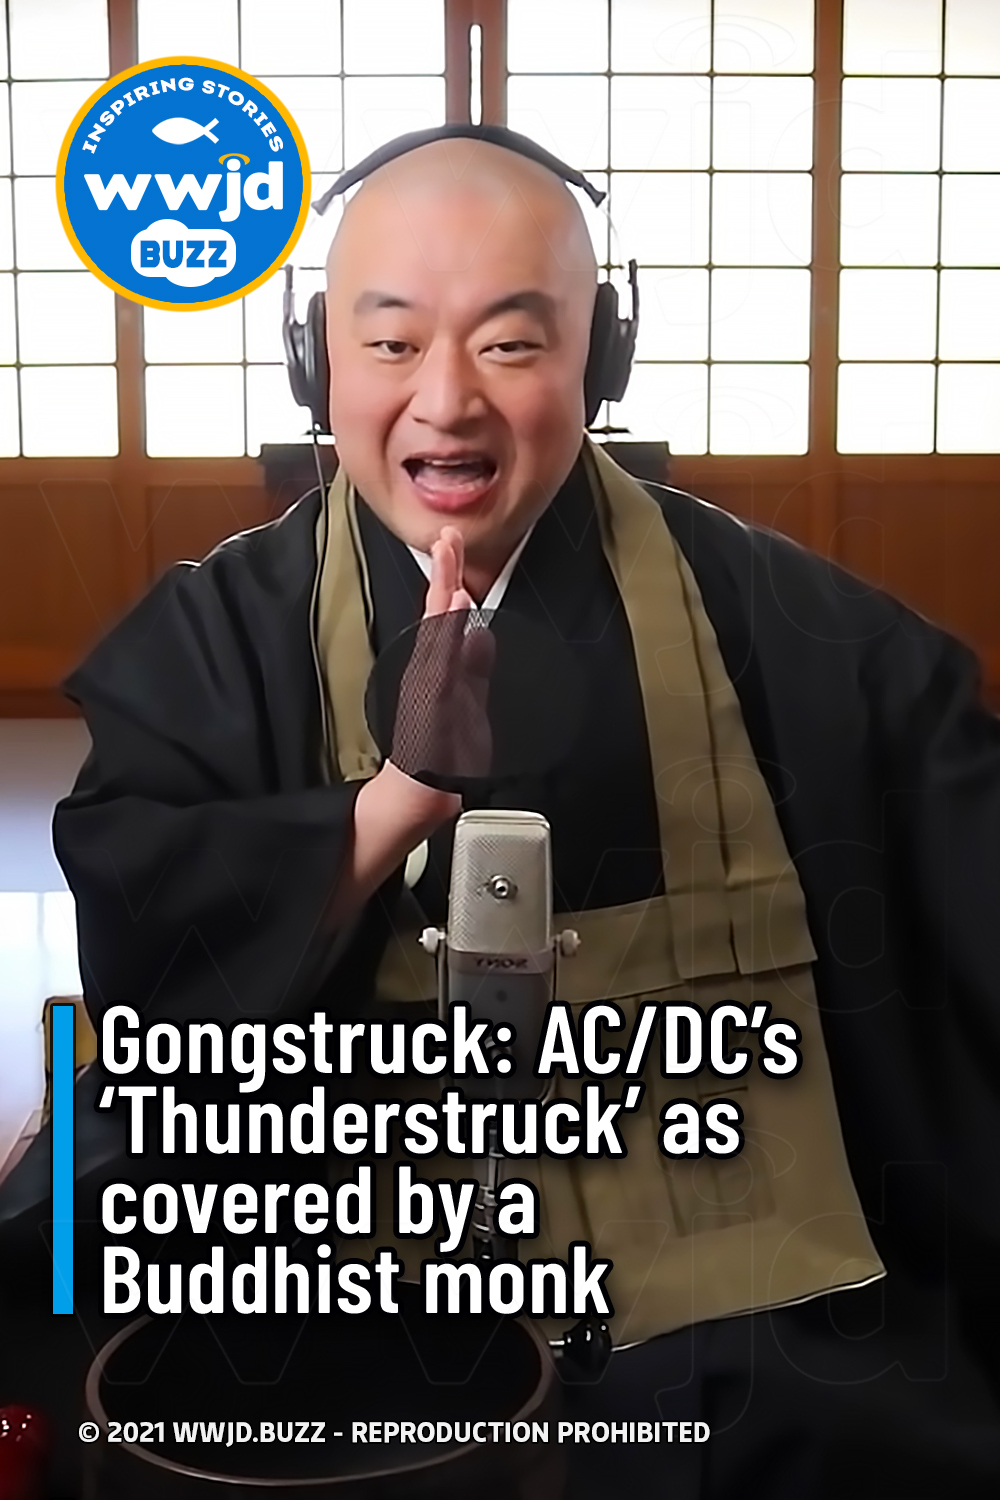 Gongstruck: AC/DC’s ‘Thunderstruck’ as covered by a Buddhist monk